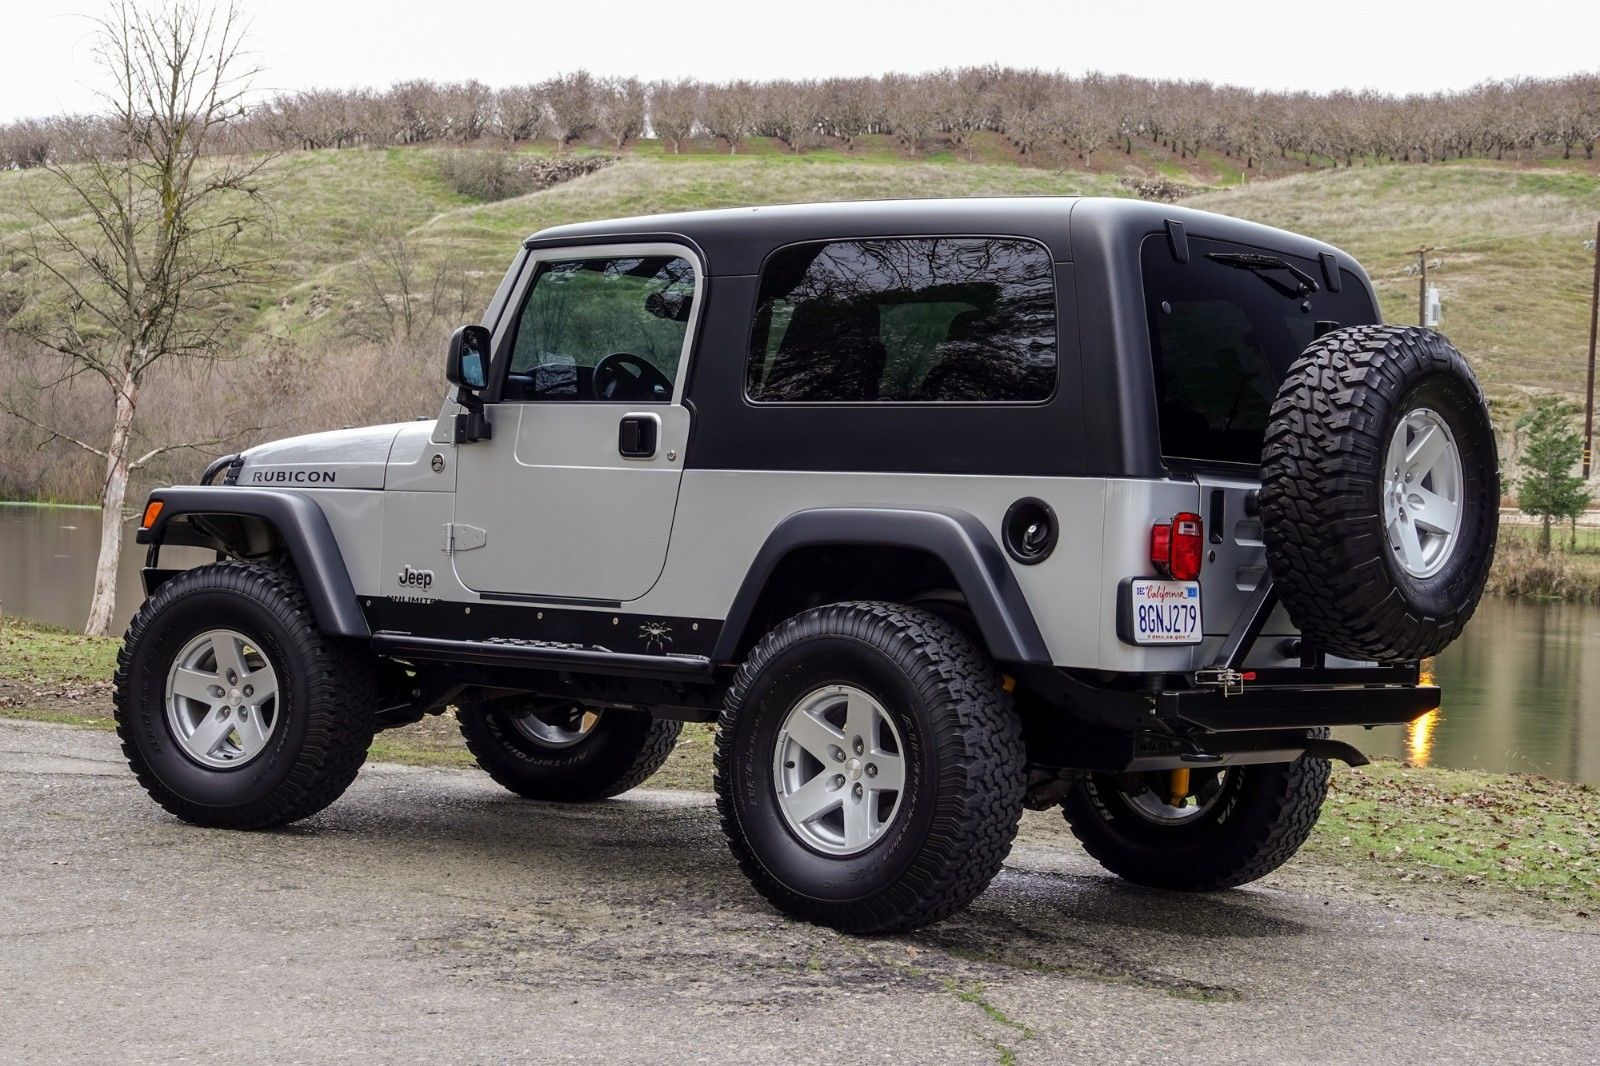 ExPo Classifieds: Rubicon Unlimited LJ with 9,800 Miles - Expedition Portal